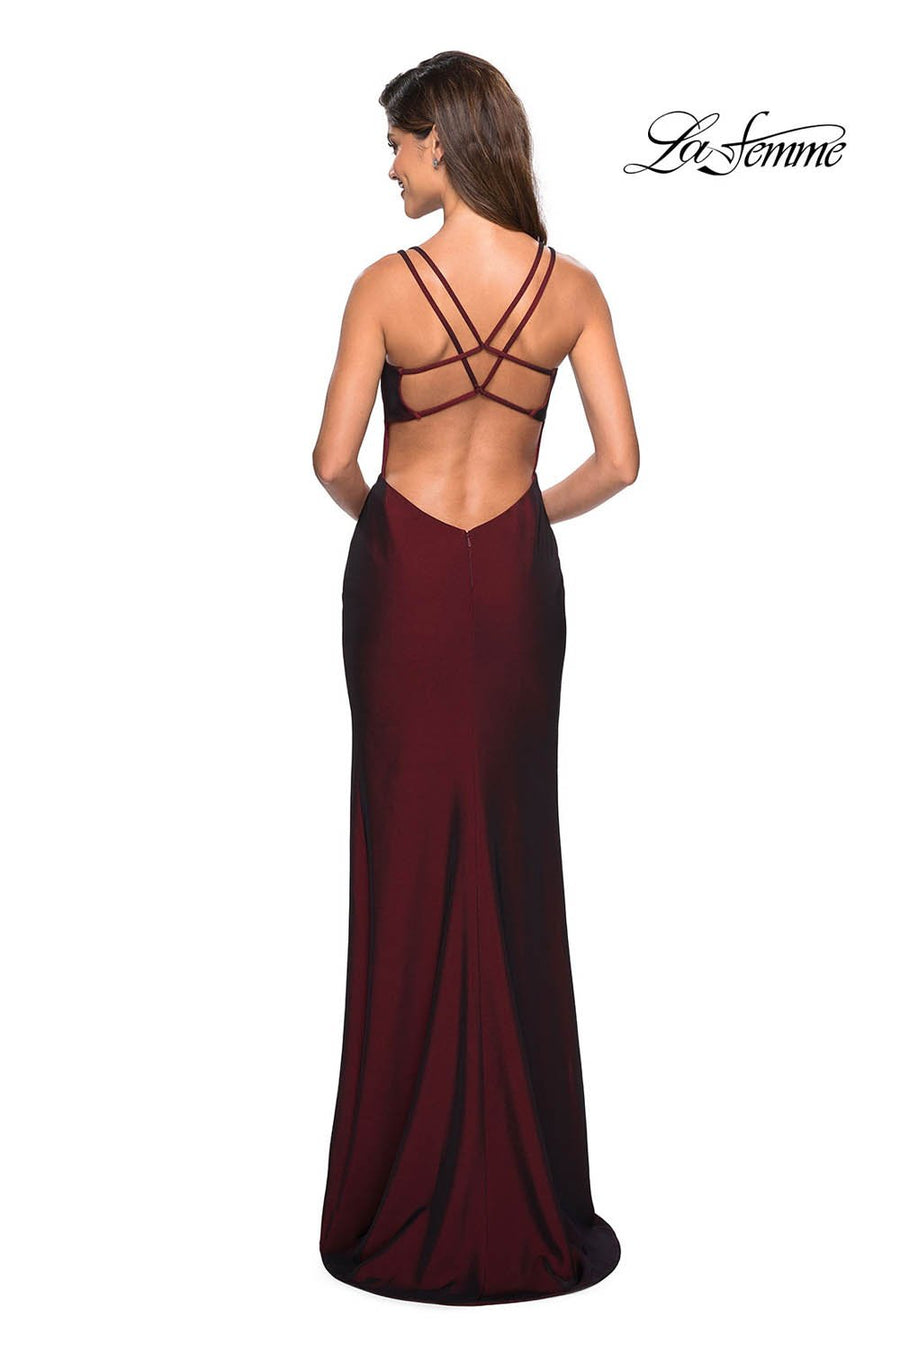 La Femme 27512 prom dress images.  La Femme 27512 is available in these colors: Burgundy, Navy, Violet.